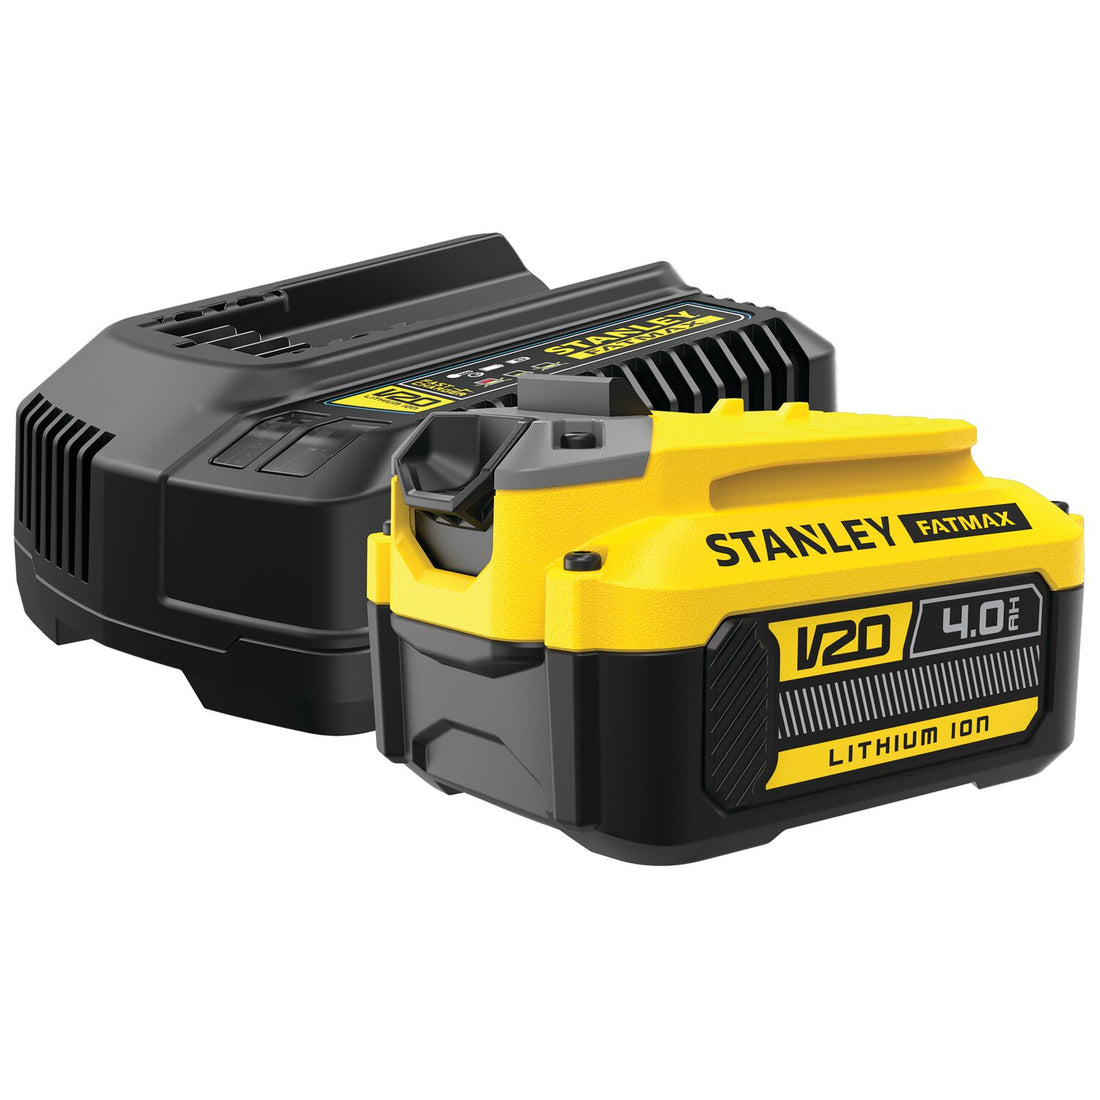 KIT WITH STANLEY FATMAX 2AH CHARGER AND 18V BATTERY